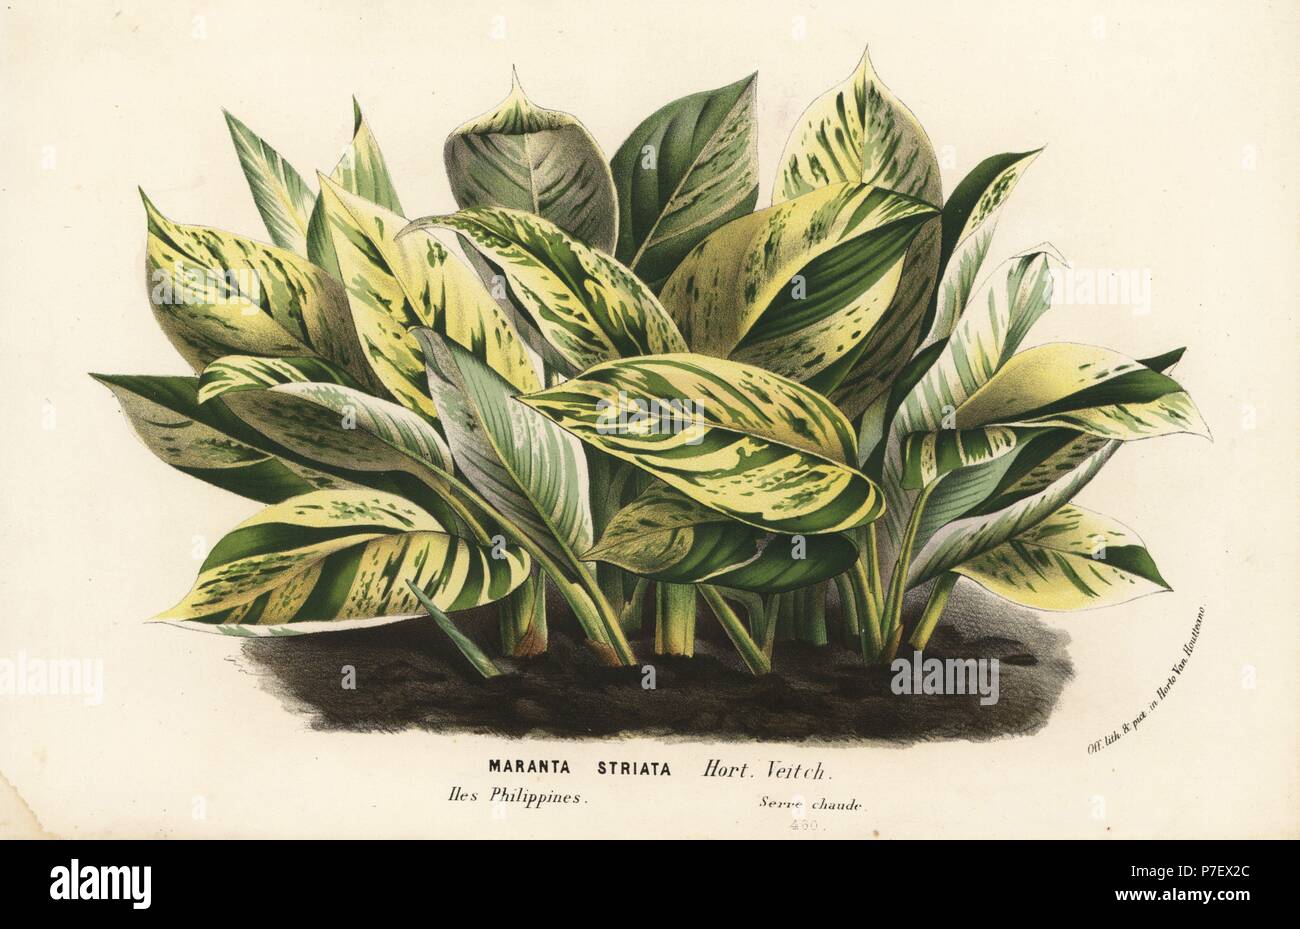 Striped prayer plant, Maranta striata. Handcoloured lithograph from Louis van Houtte and Charles Lemaire's Flowers of the Gardens and Hothouses of Europe, Flore des Serres et des Jardins de l'Europe, Ghent, Belgium, 1862-65. Stock Photo